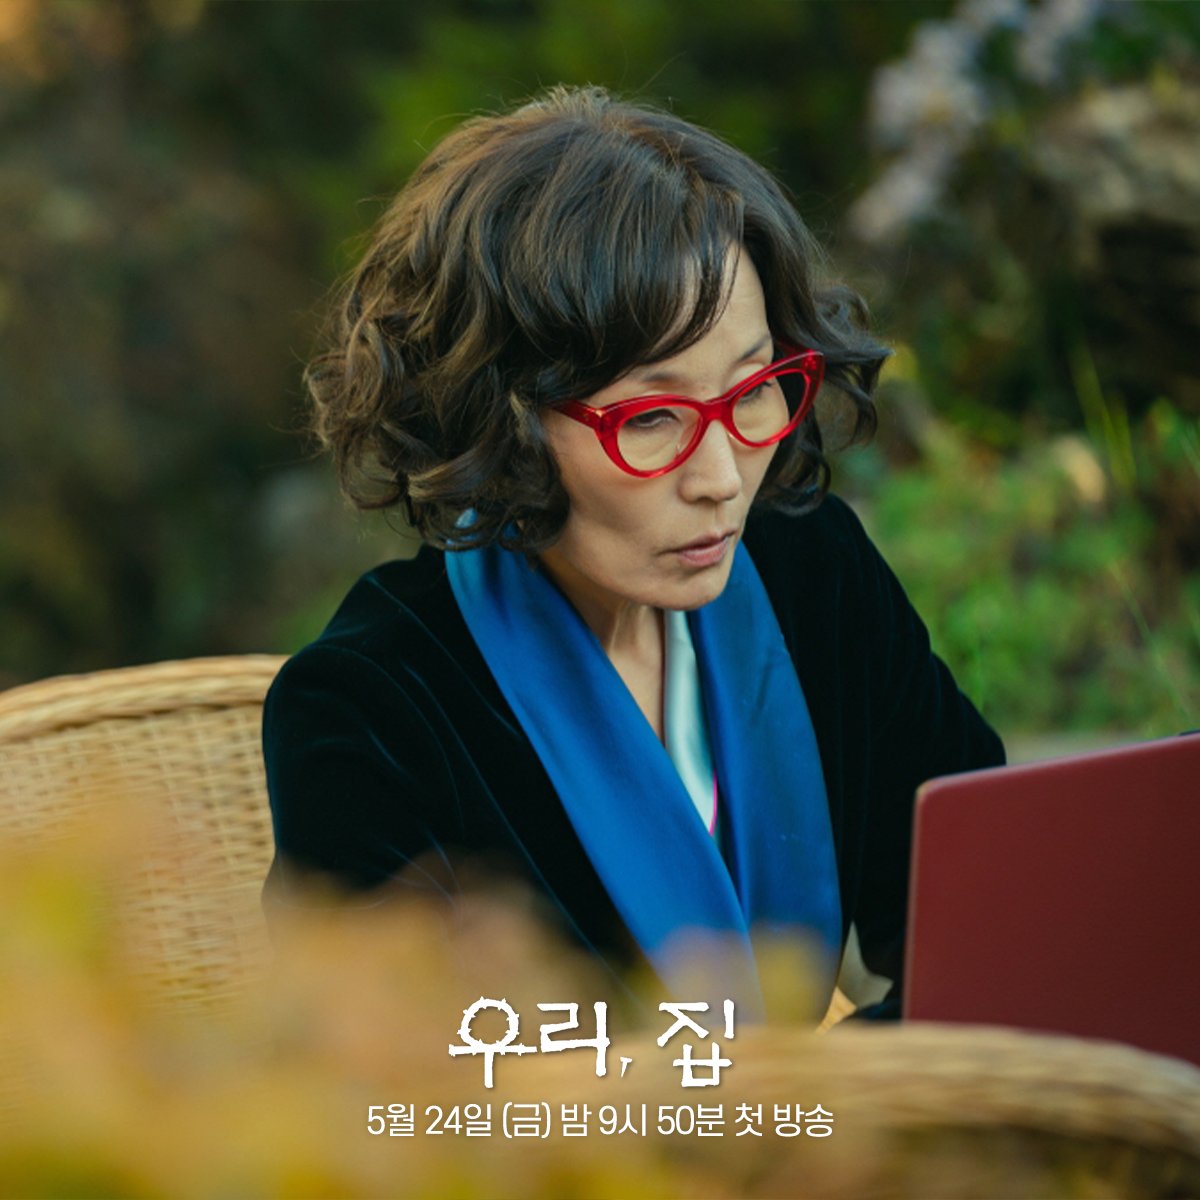 Lee Hye Young Is Kim Hee Sun's Mystery Novel-Writing Mother-In-Law In 